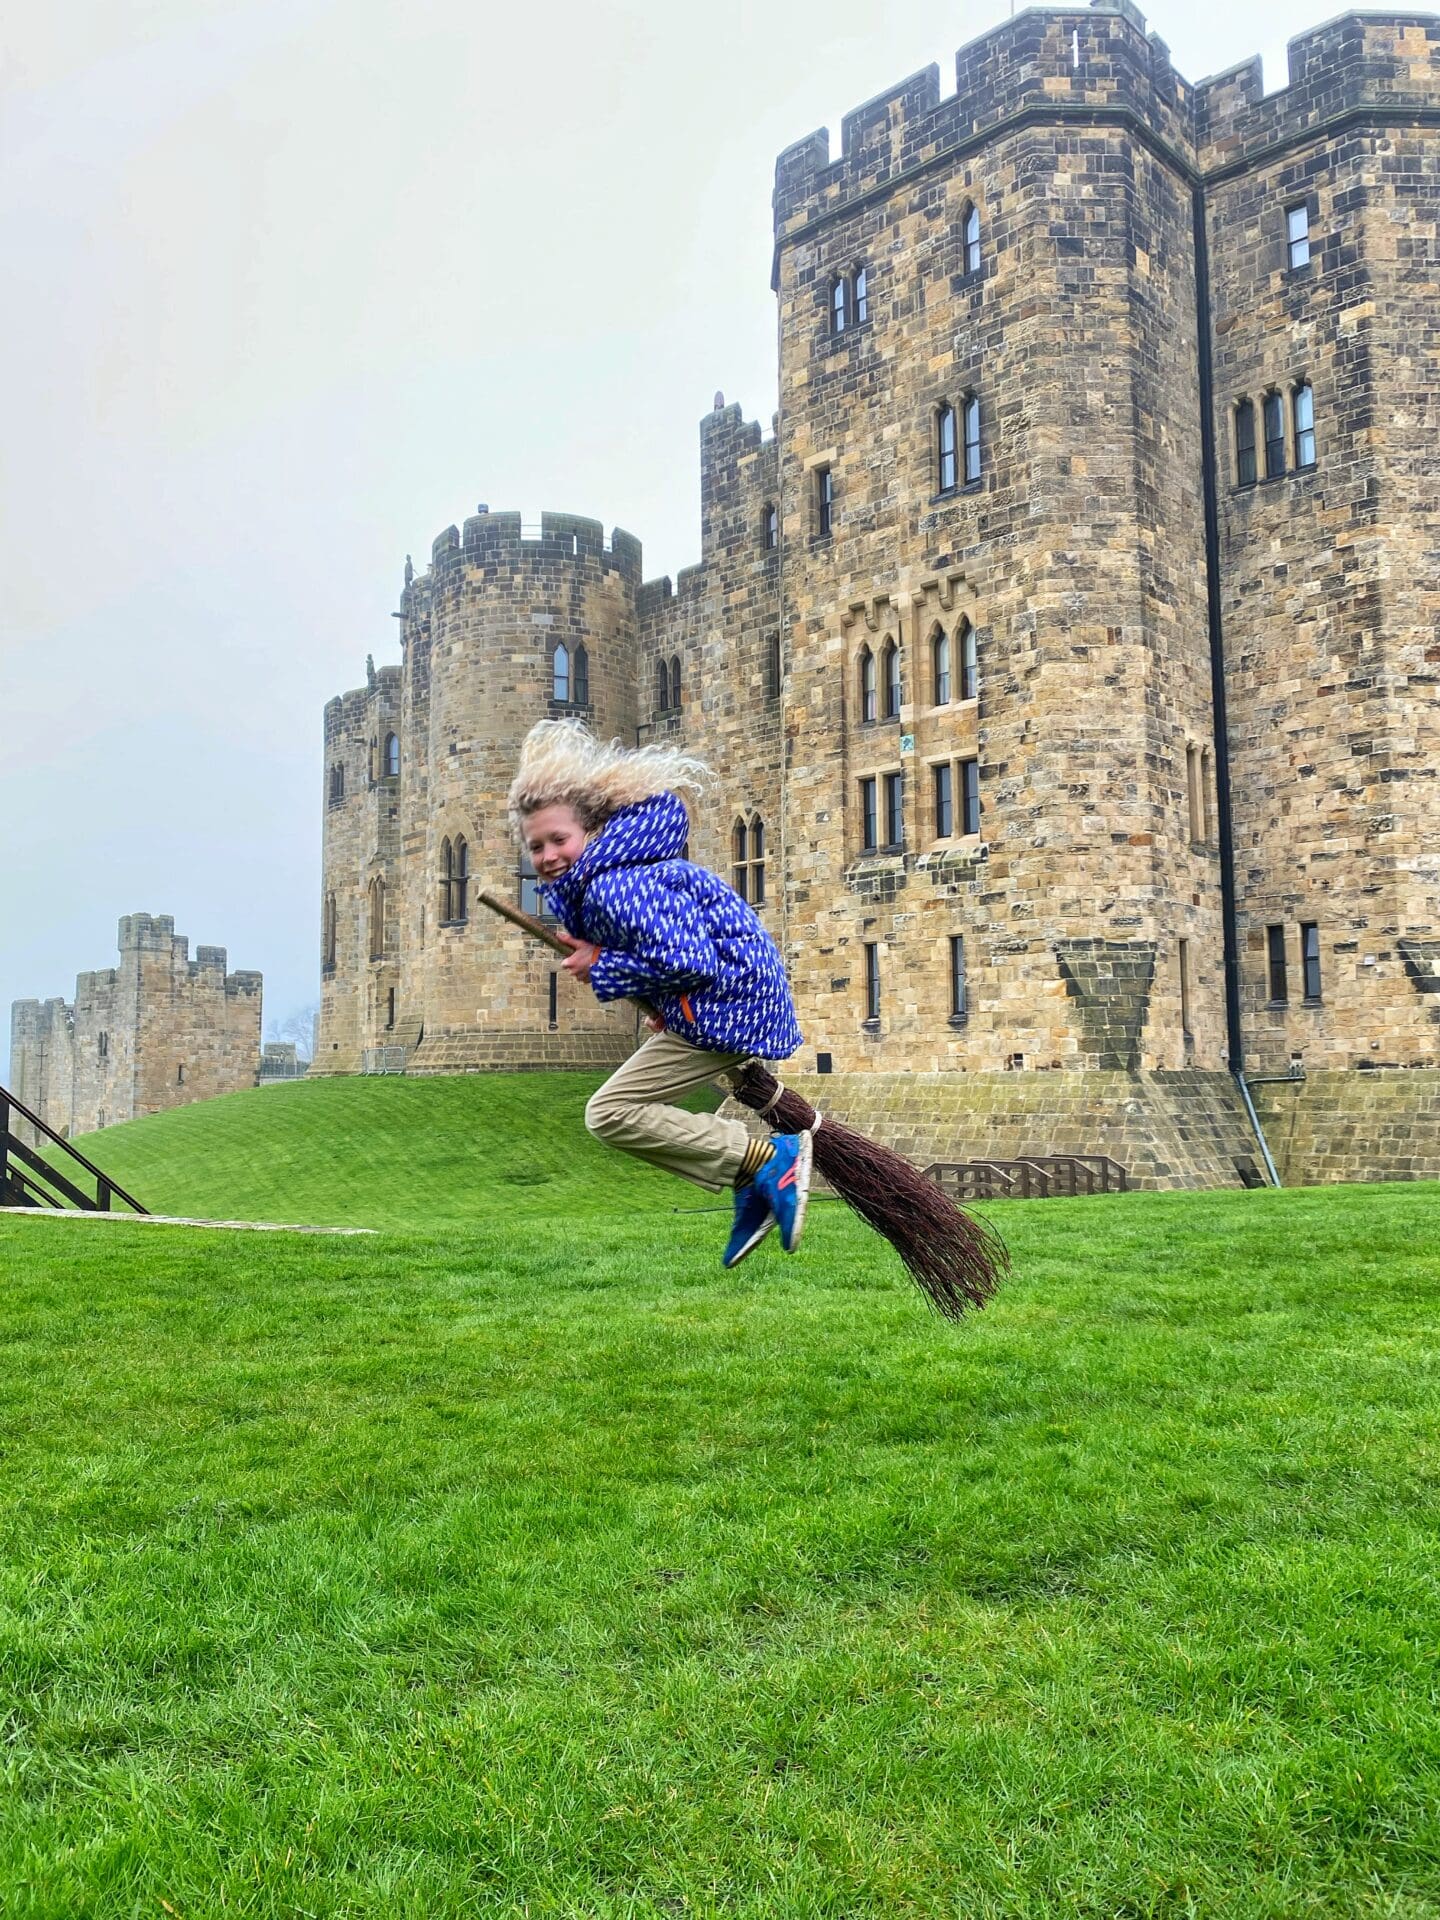 Flying on a broomstick